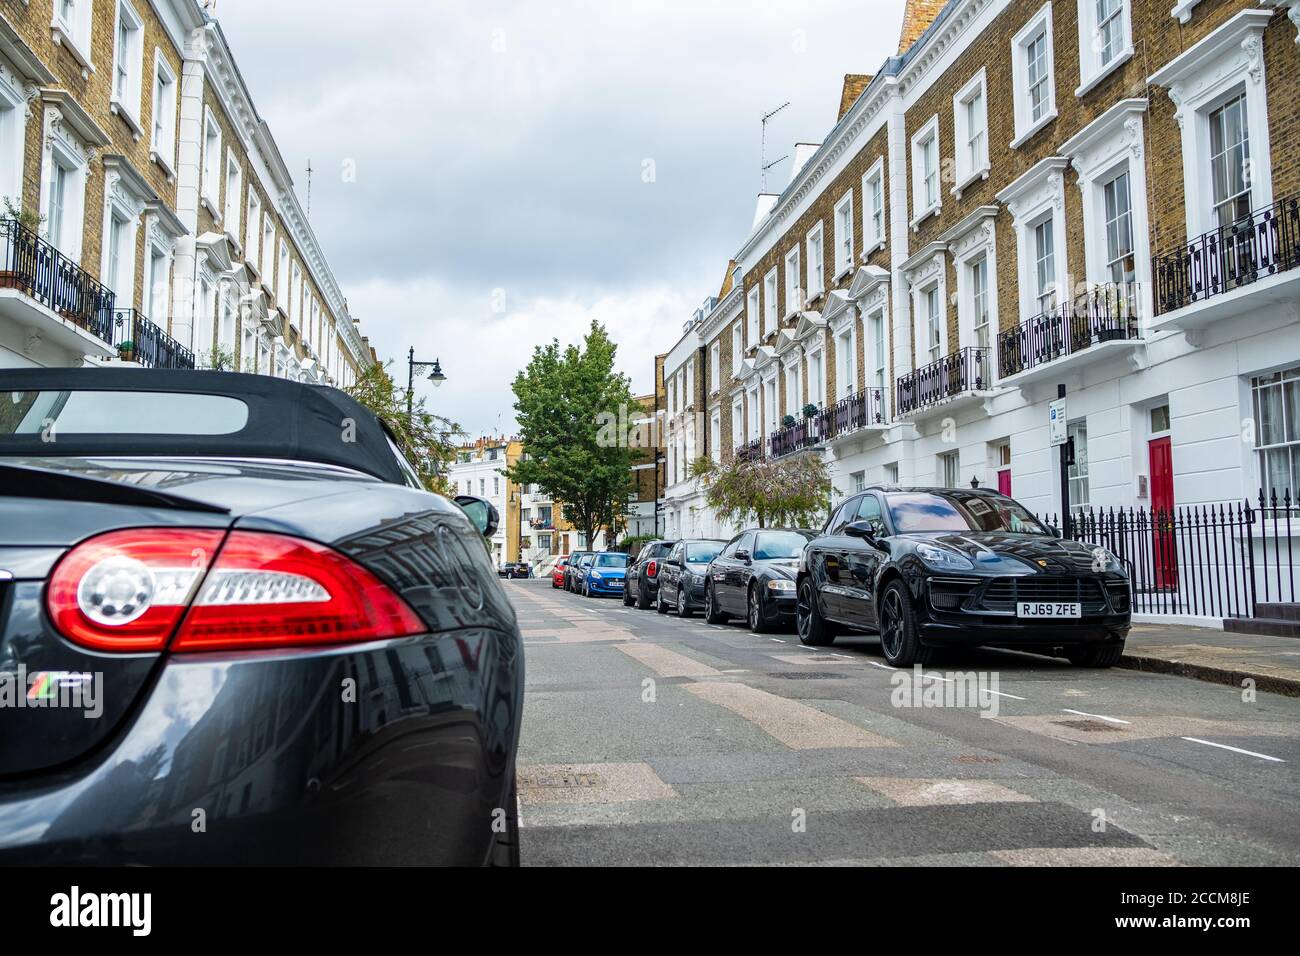 London- Residential street of townhouses in Pimlico, south west London Stock Photo